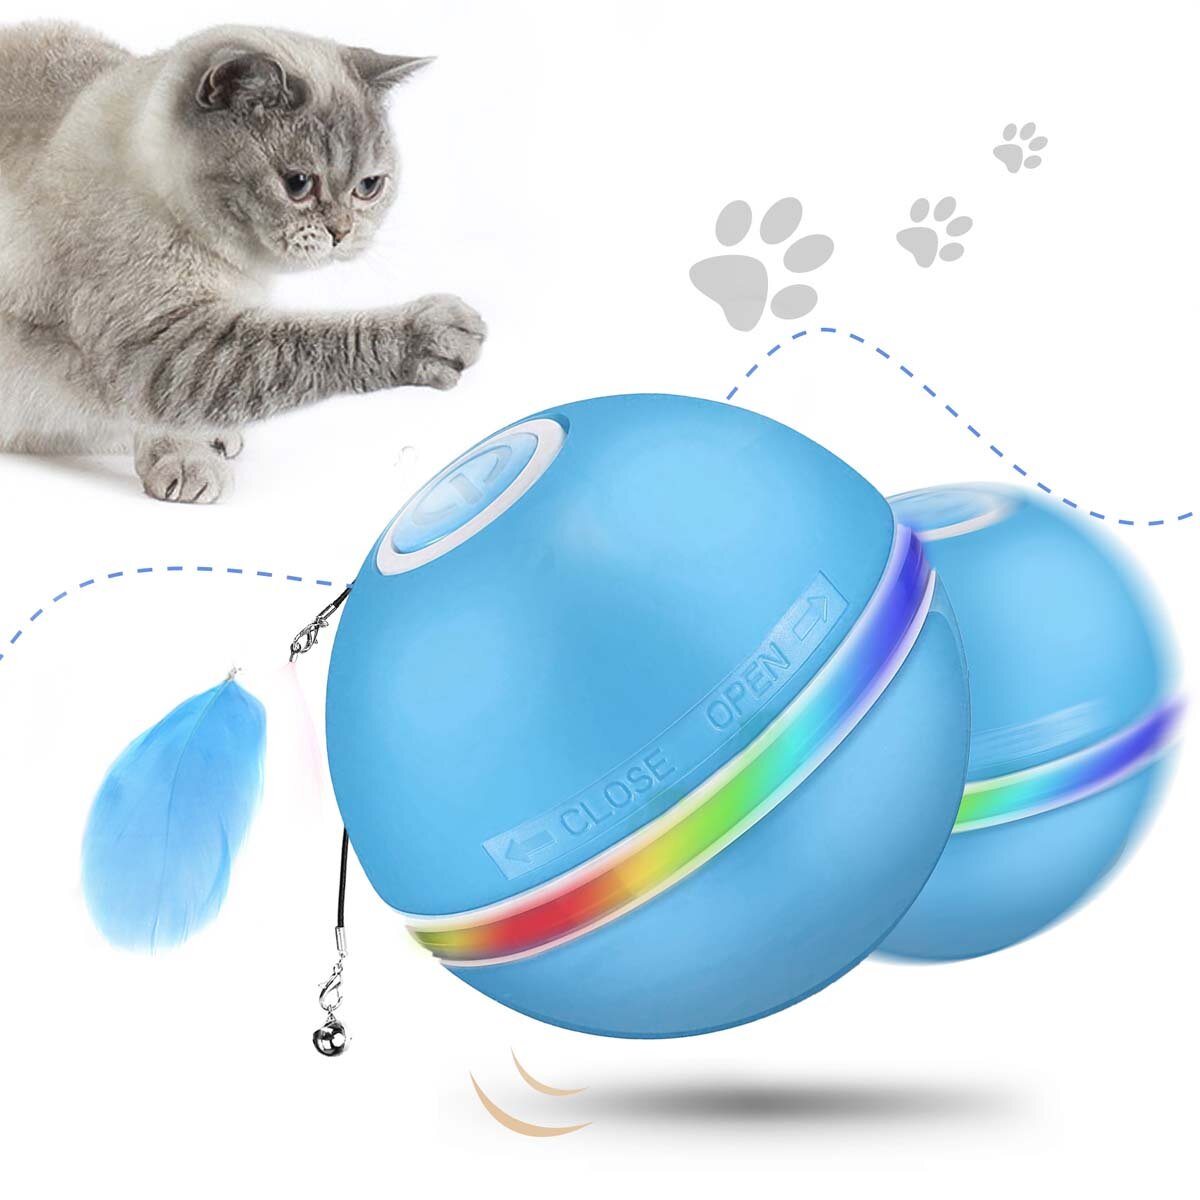 

Camfosy Interactive Cat Toy Ball, Electric Cat Balls with LED Light 360° Self-Spinning Ball USB Rechargeable Toys for Ca